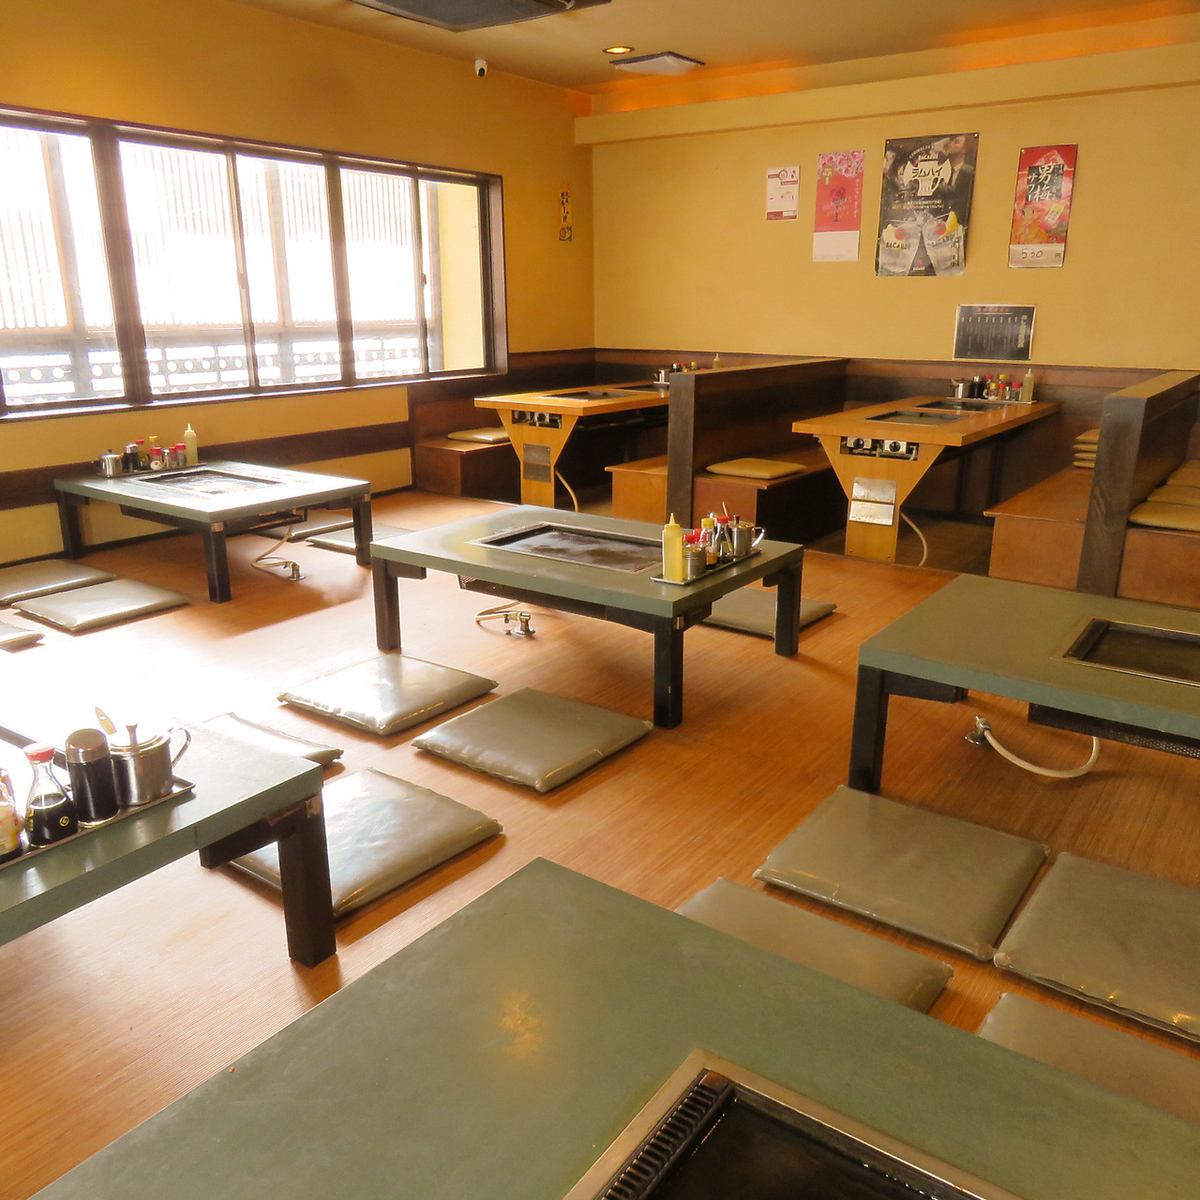 A 4-minute walk from Tsukishima Station! Suitable for large parties and late hours!